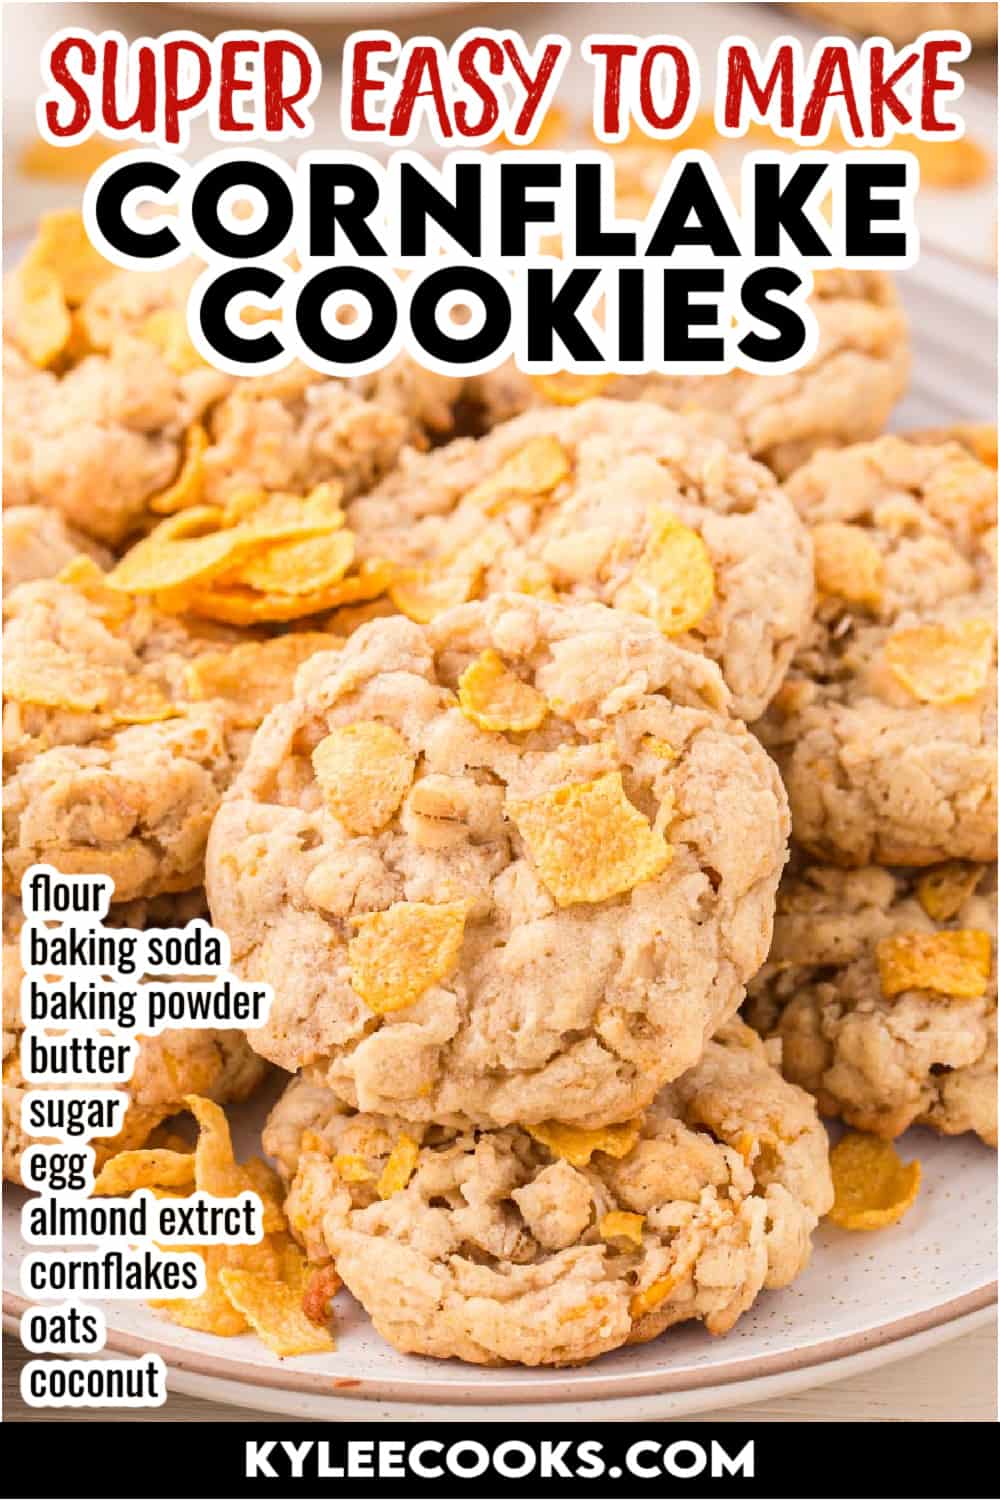 cornflake cookies with recipe name and ingredients overlaid in text.